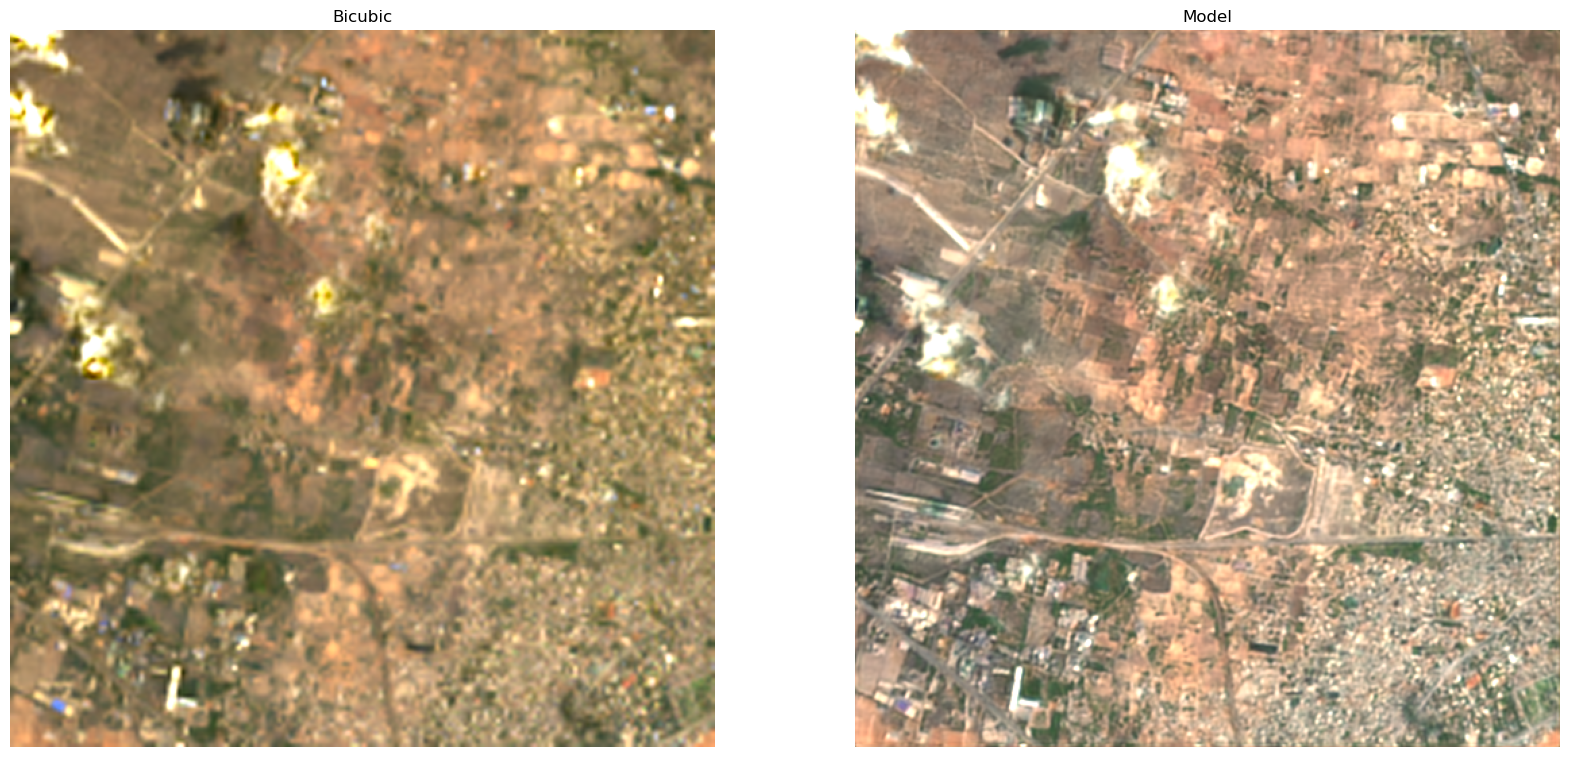 Satelite images upsampled by our model compared to baseline